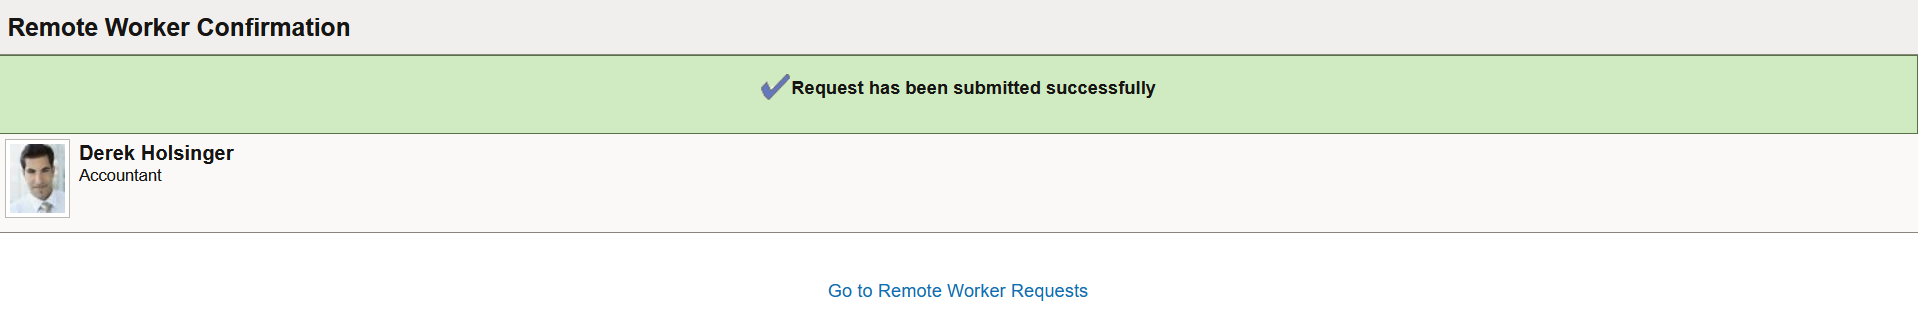 Remote Worker Confirmation page when approvals are not required